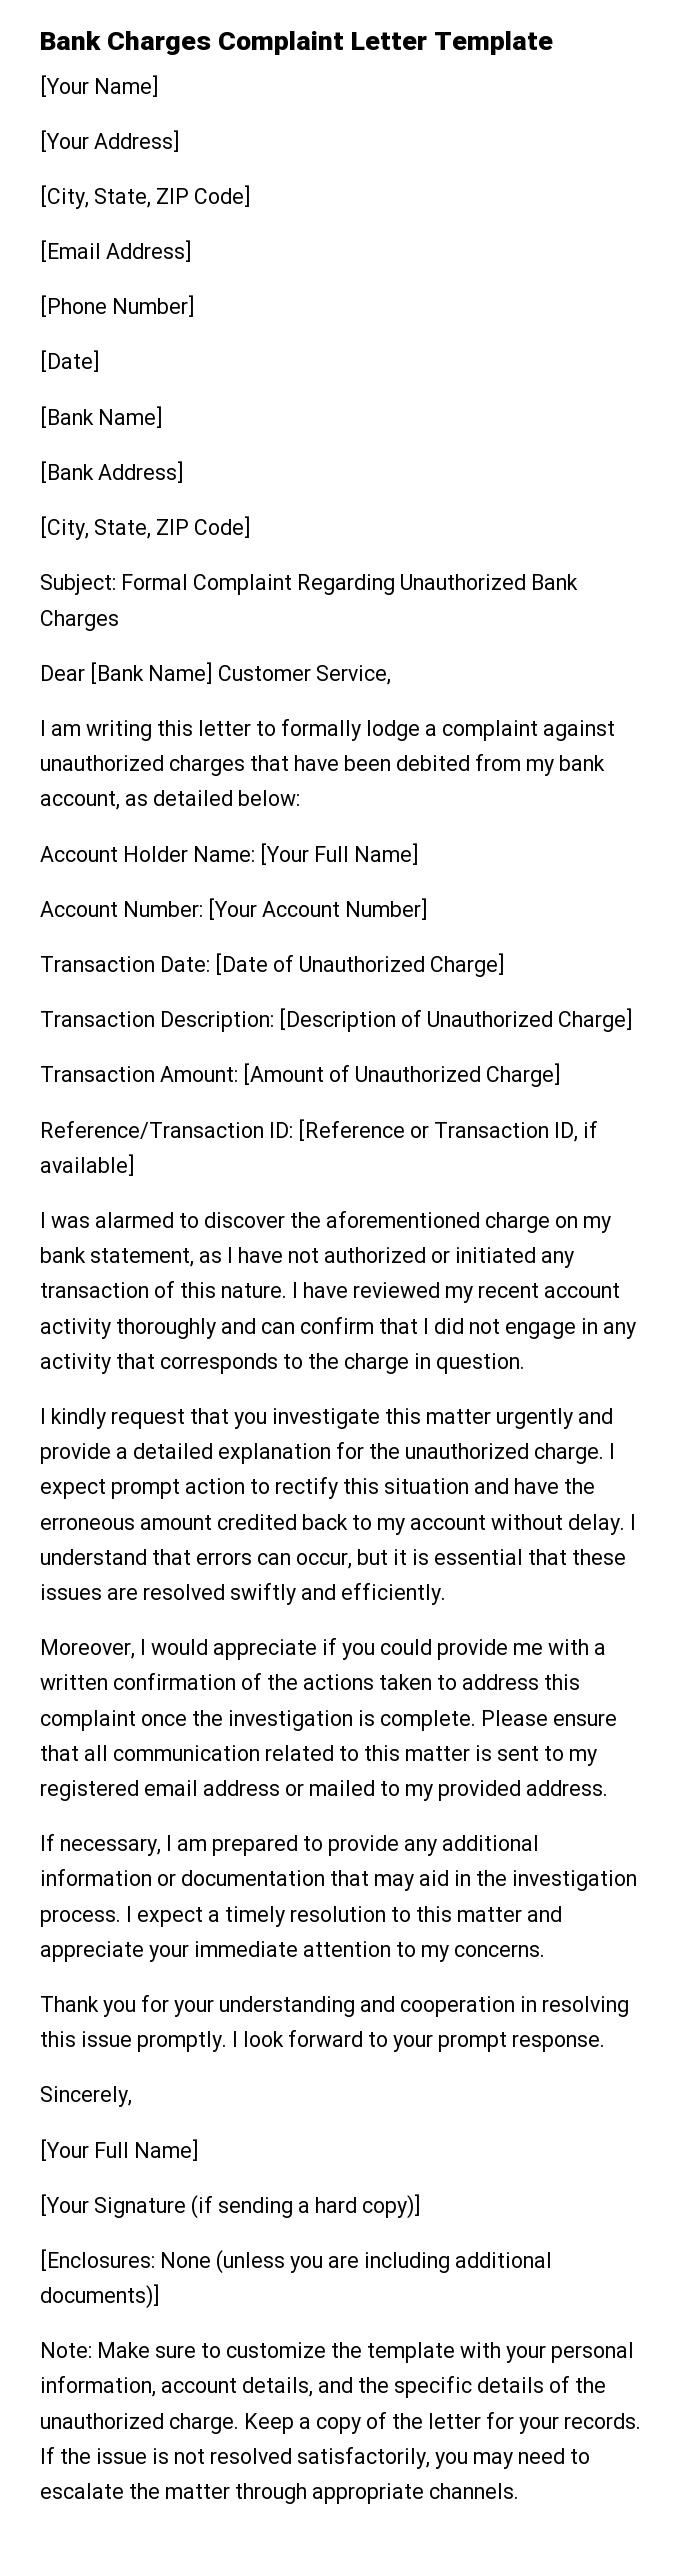 Bank Charges Complaint Letter Template